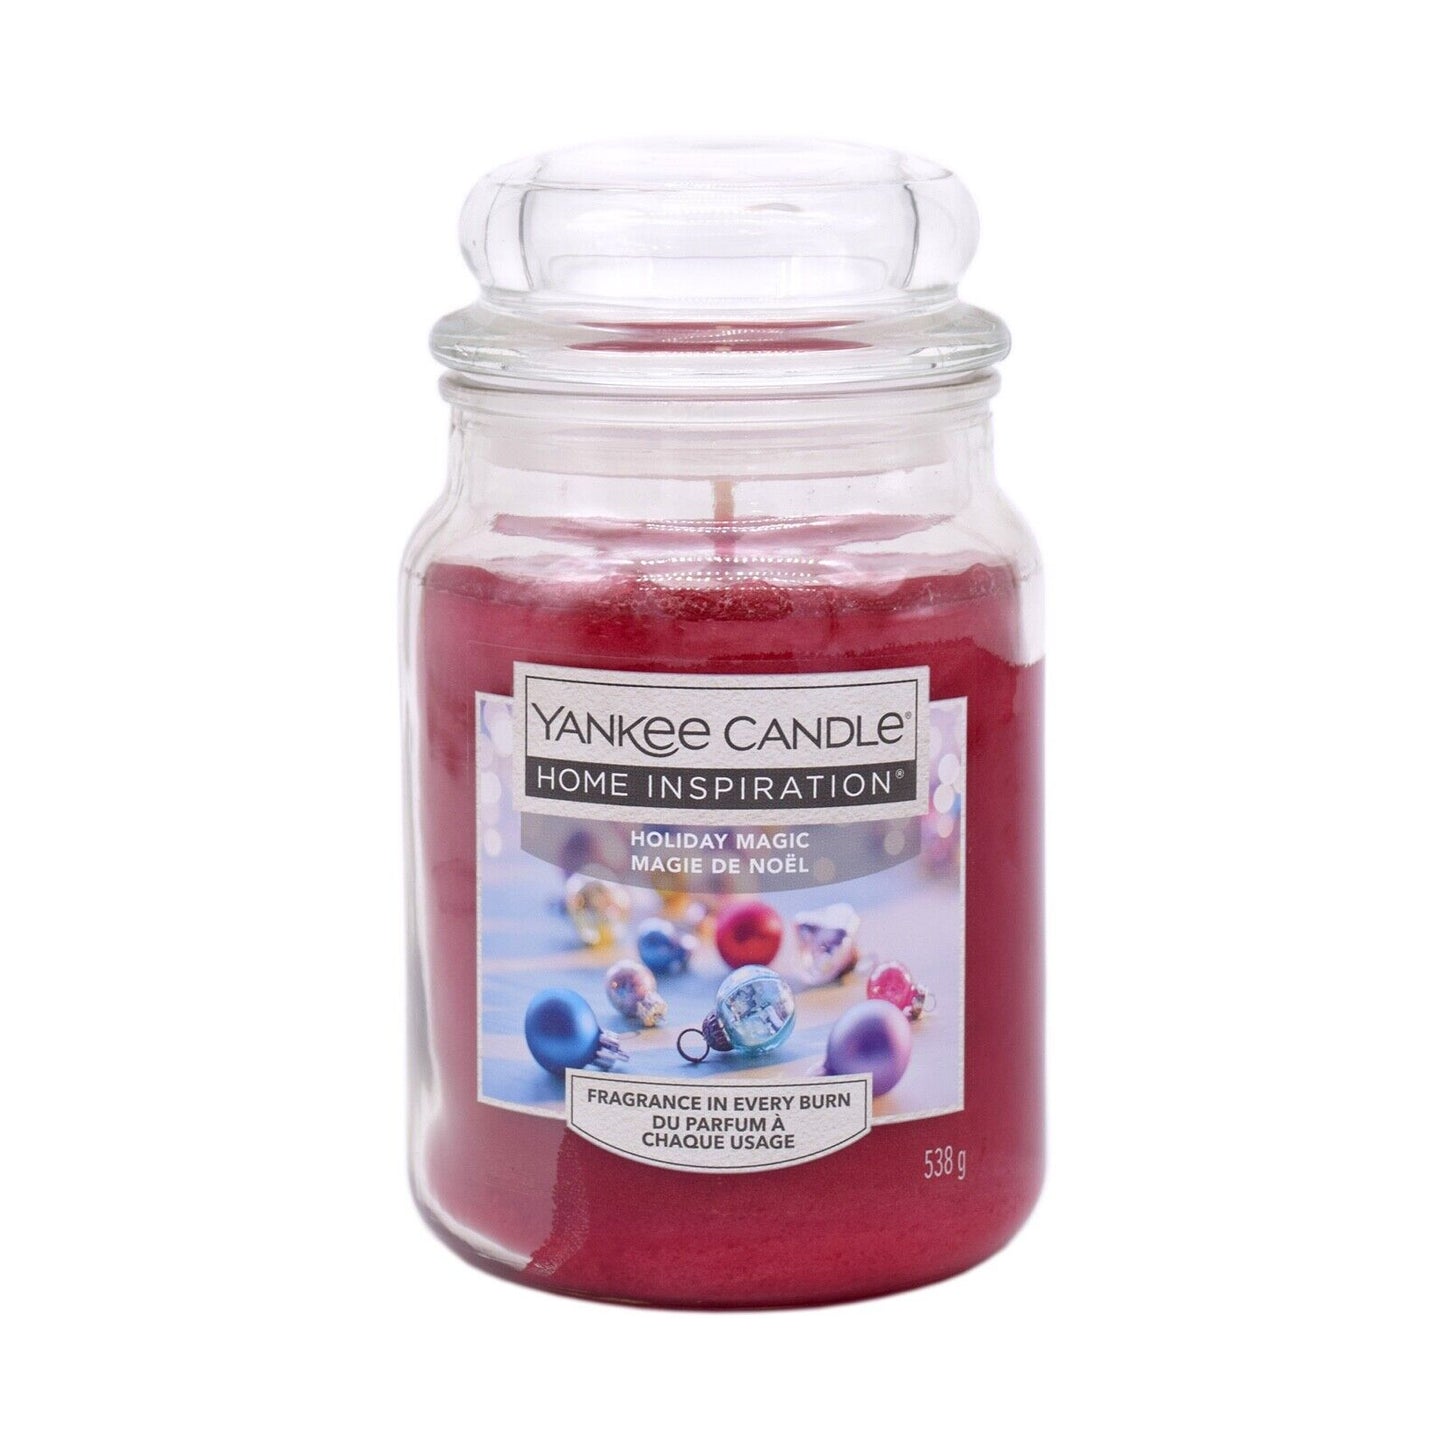 2x Yankee Candle Home Inspiration *Holiday* Large Glass Jar 538g 120hr Burn Time